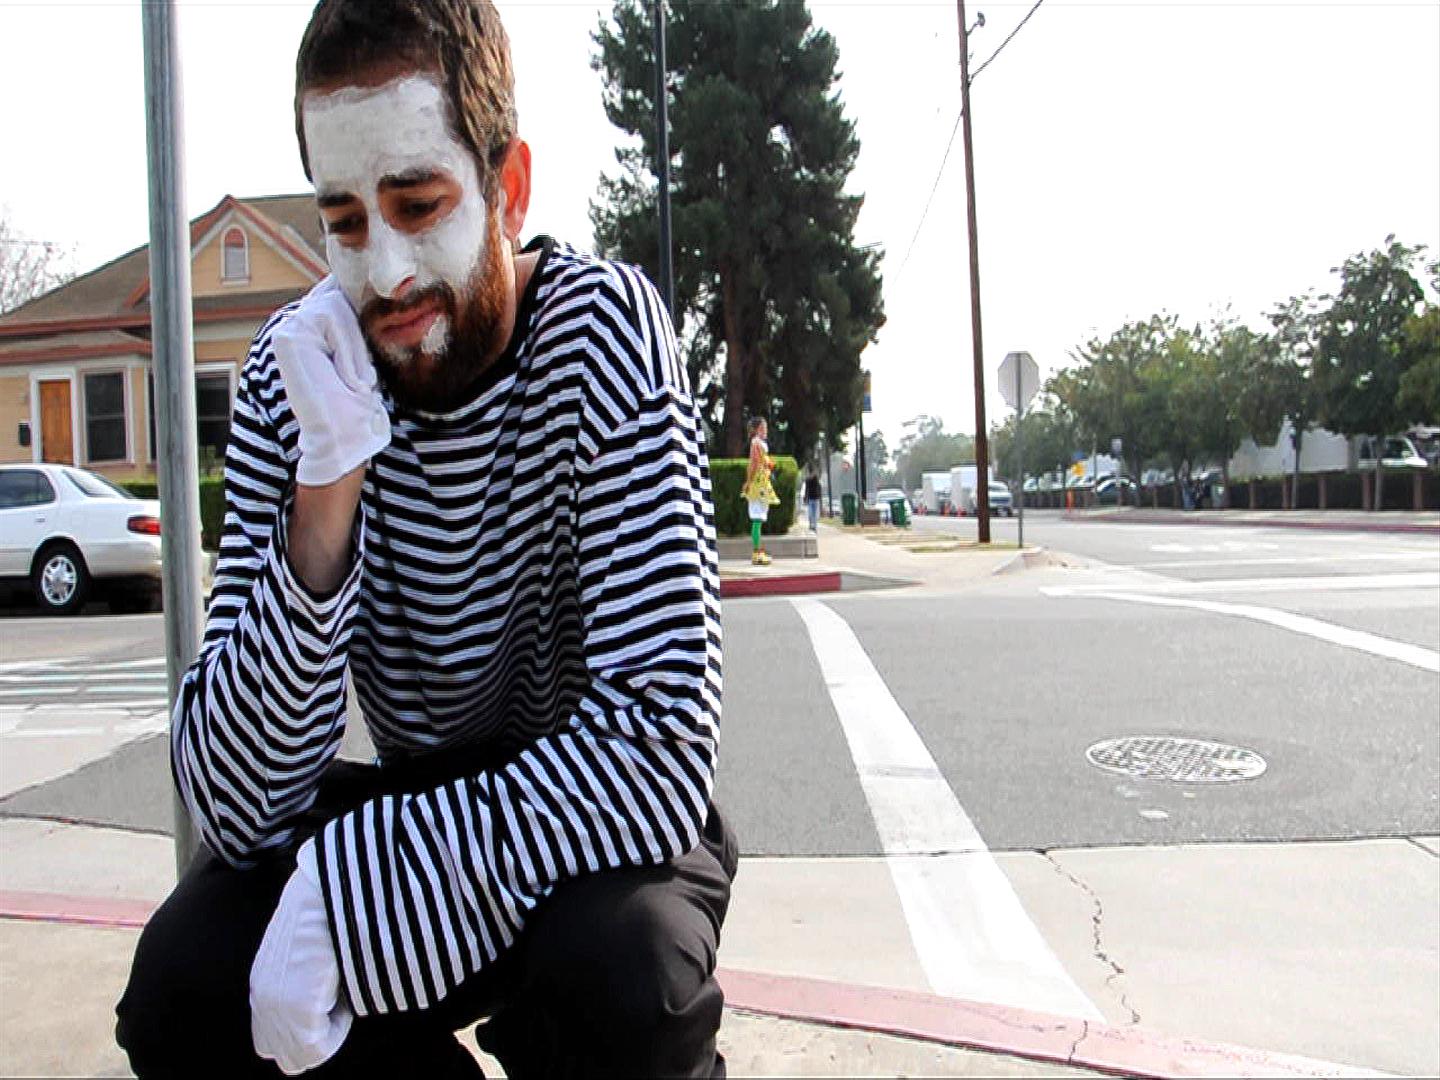 The Mime (Steve Morrison) has a moment in 